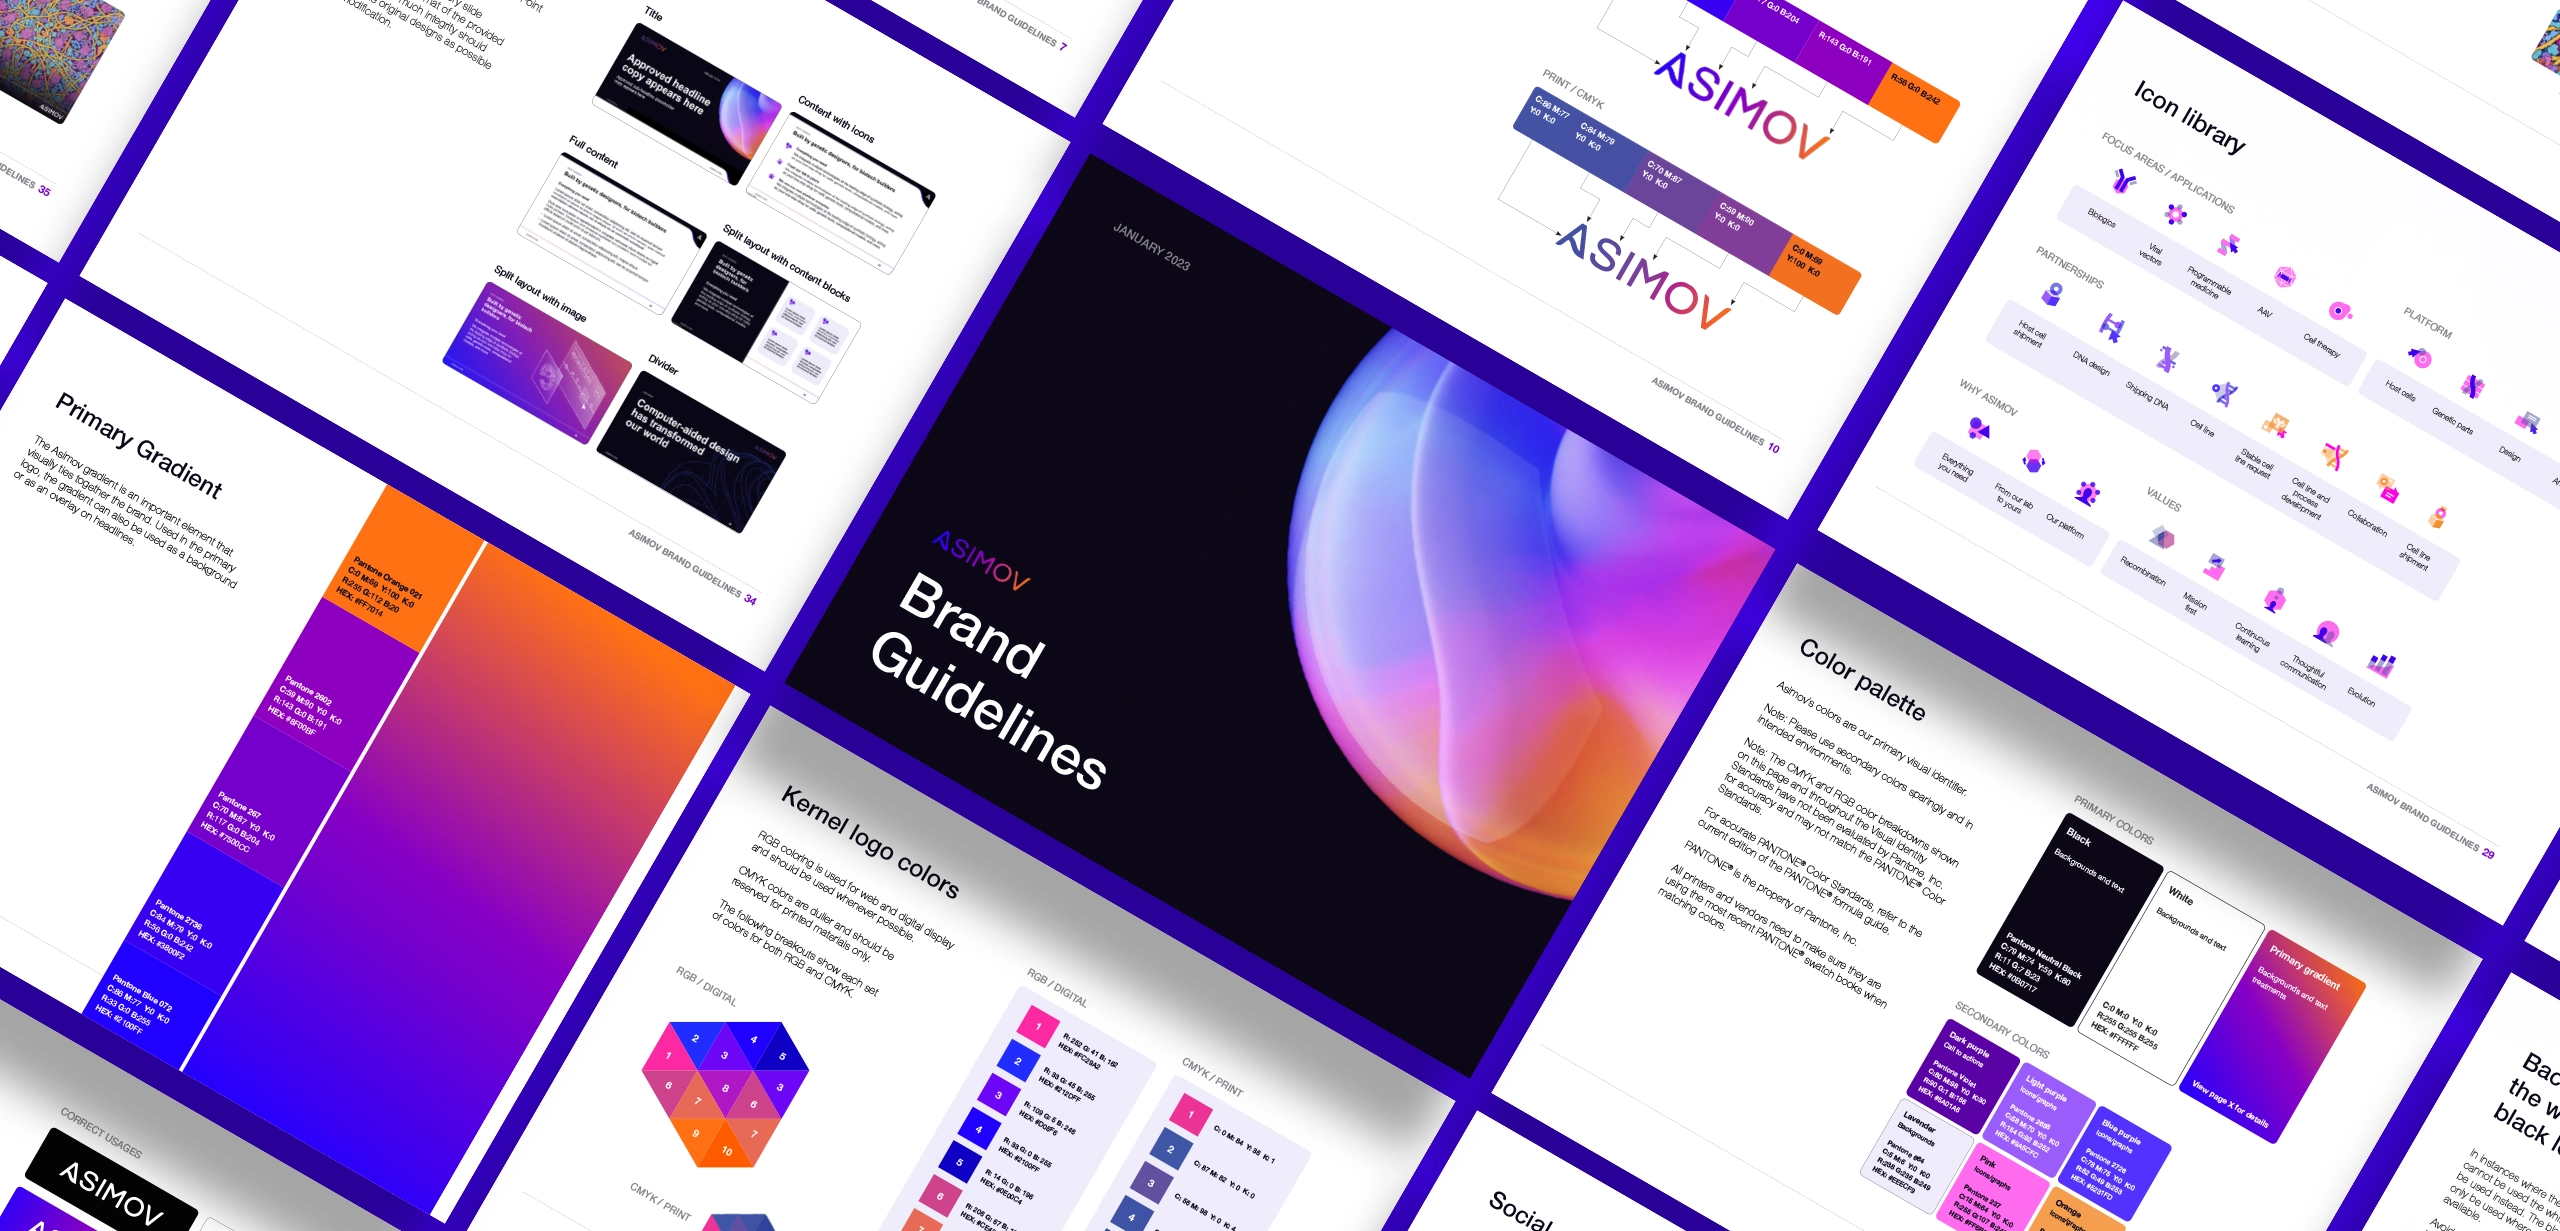 Genetic science company brand guidelines.